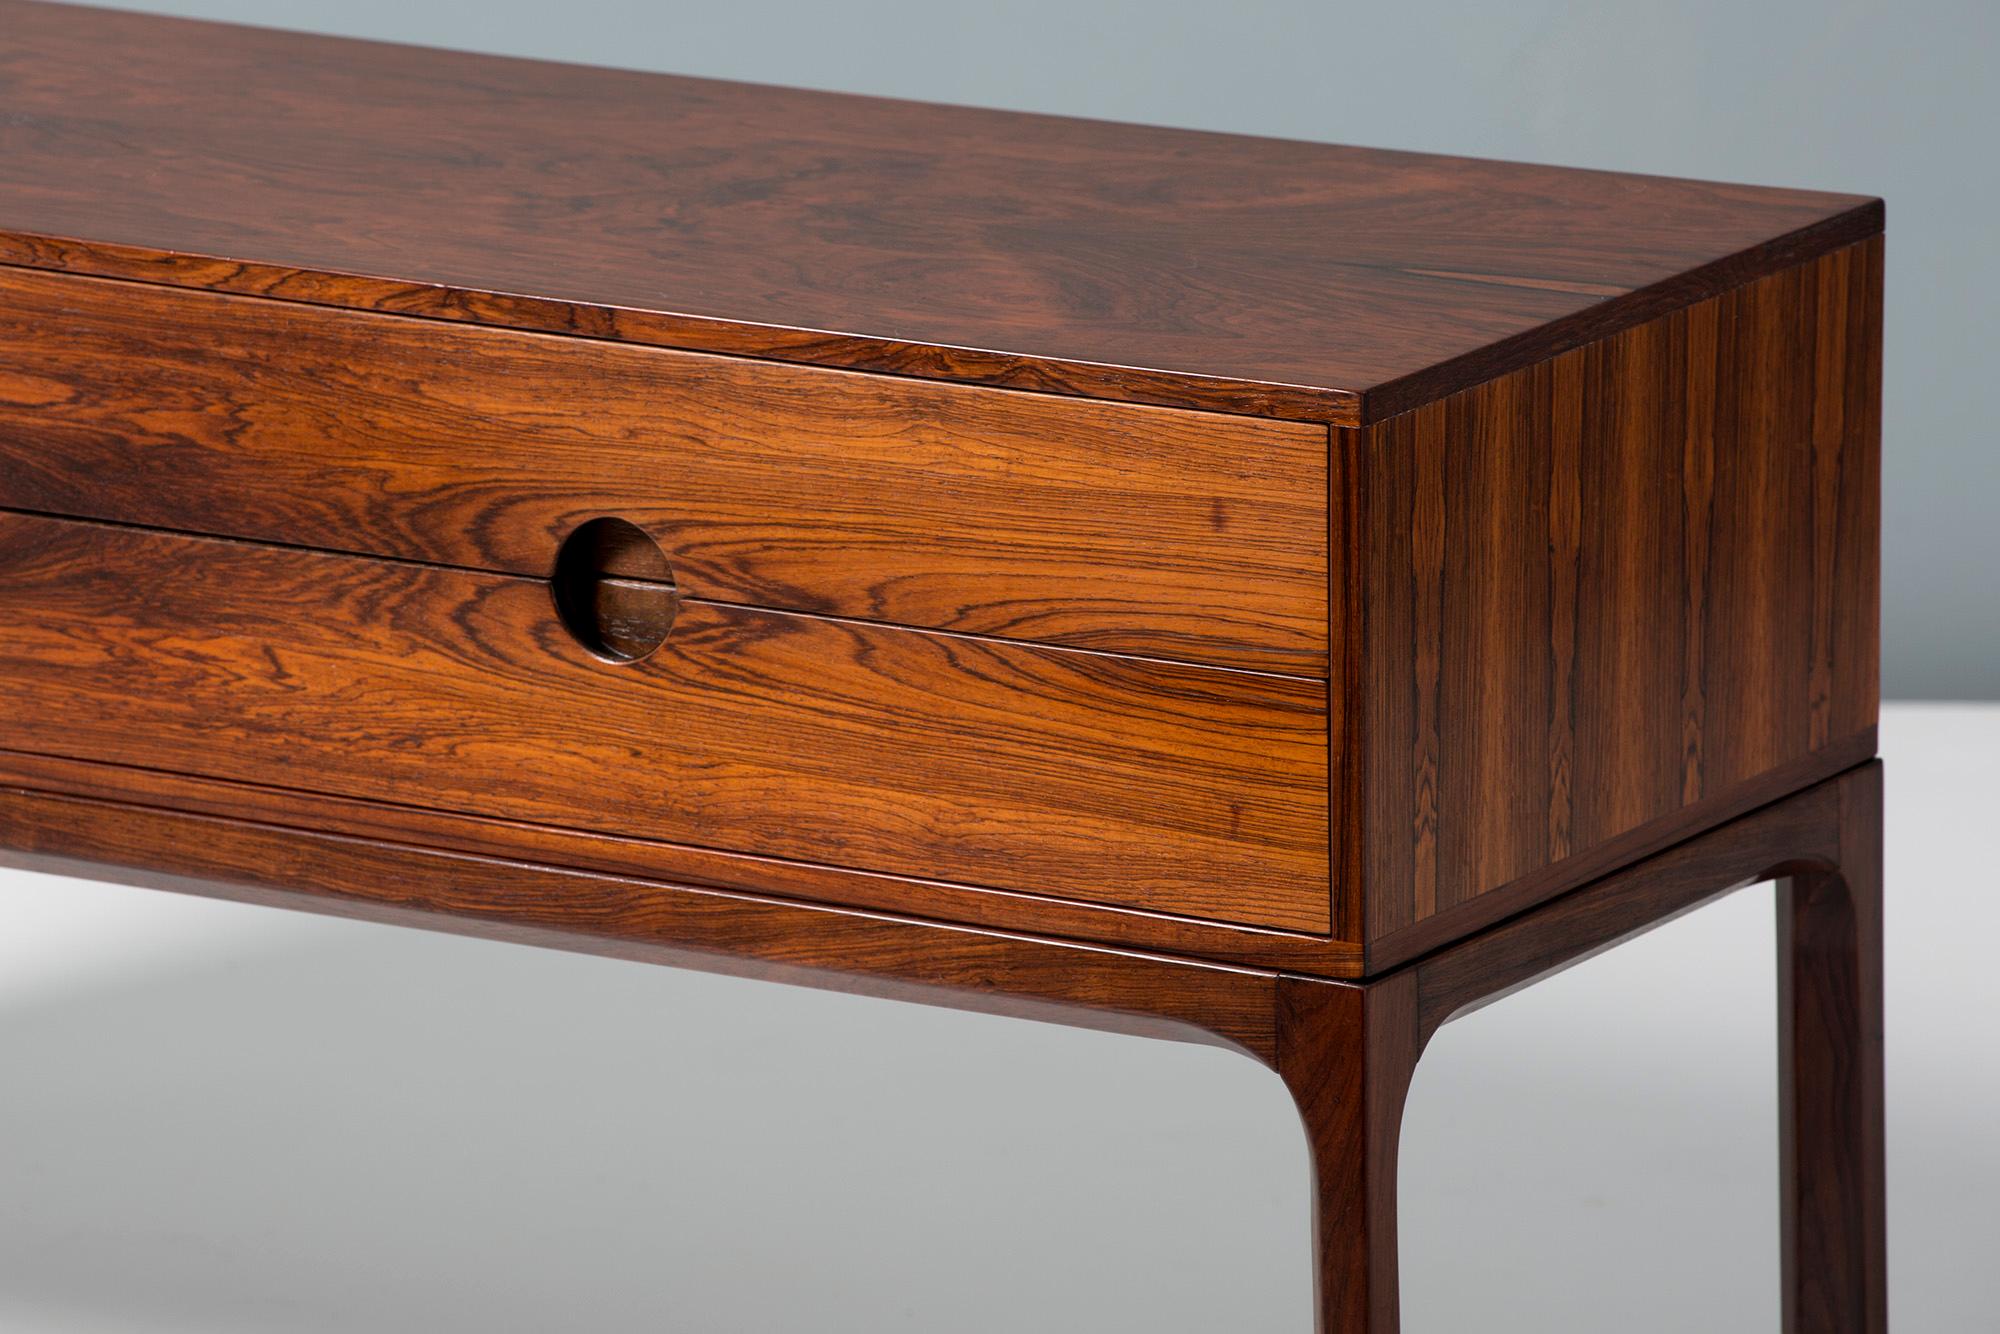 Kai Kristiansen
Low chest, circa 1960.

Low, 4-drawer chest made from solid and veneered Brazilian rosewood, produced by cabinetmaker Aksel Kjaersgaard in Odder, Denmark, circa 1960. 

The chest has 2 sets of drawers with Kristiansen's